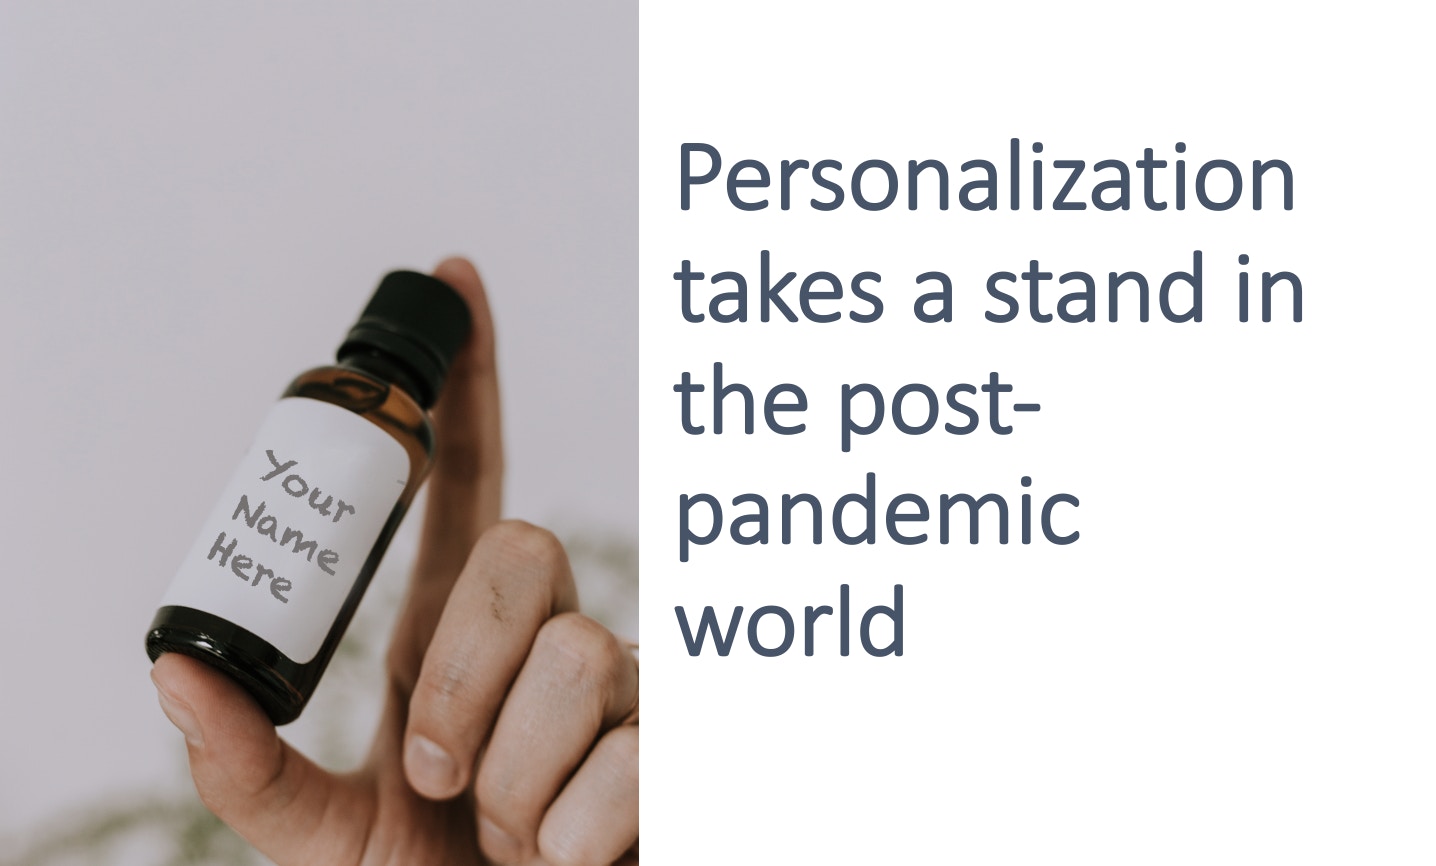 How Product Personalization Will Bring the Post-Pandemic Consumer to You